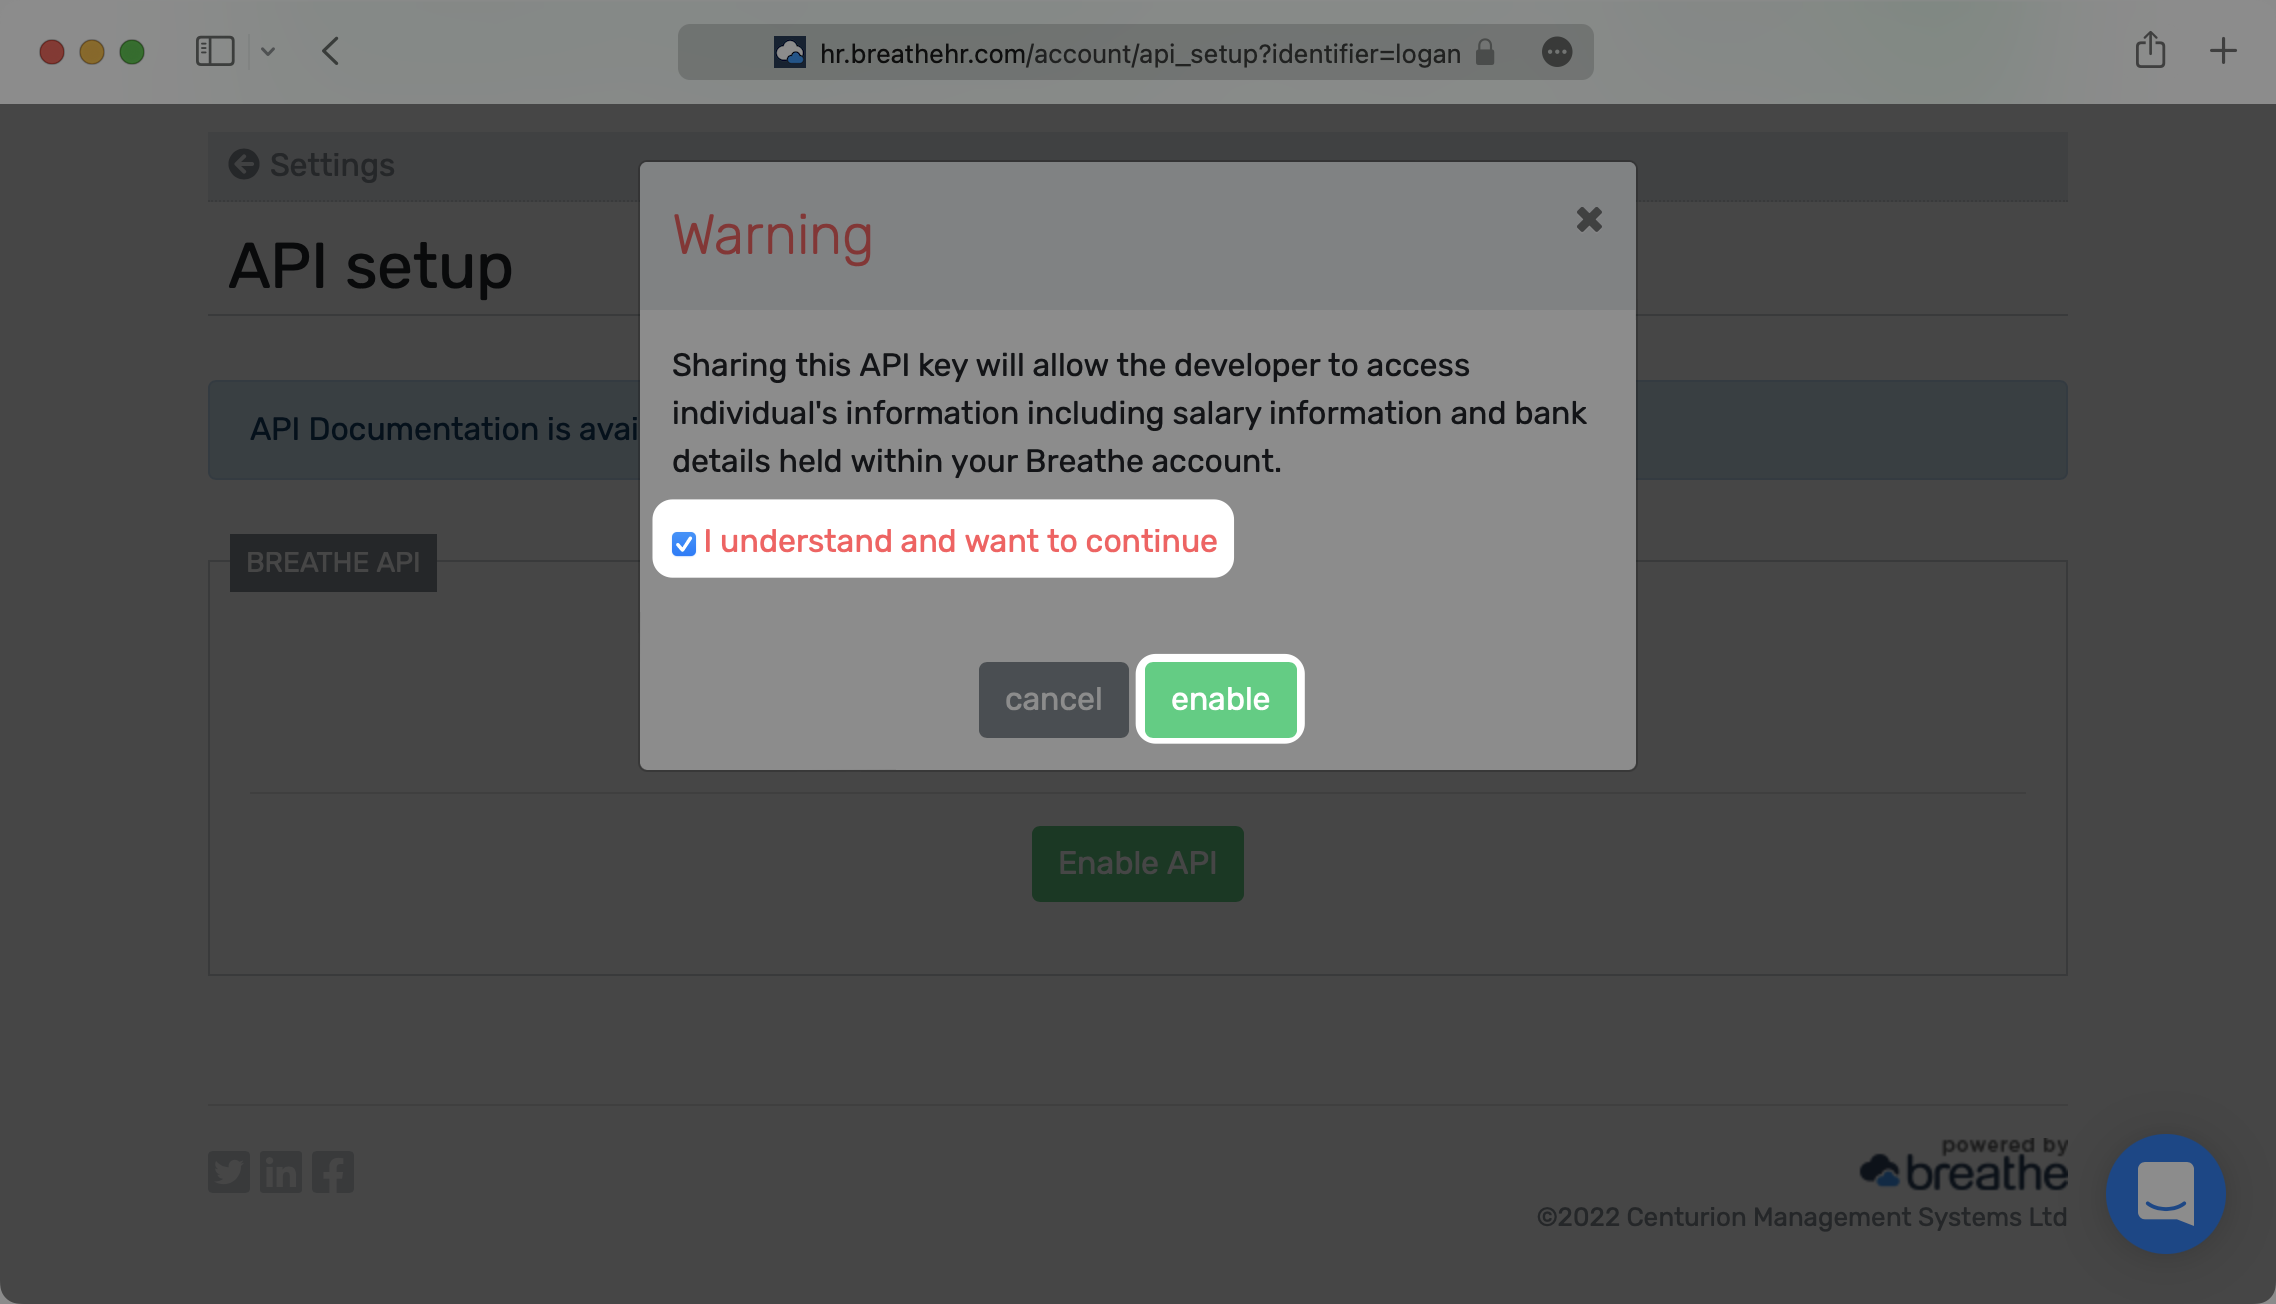 A screenshot showing to mark the checkbox denoting "I understand and want to continue" in the "Warning" modal in the Breathe HR dashboard.